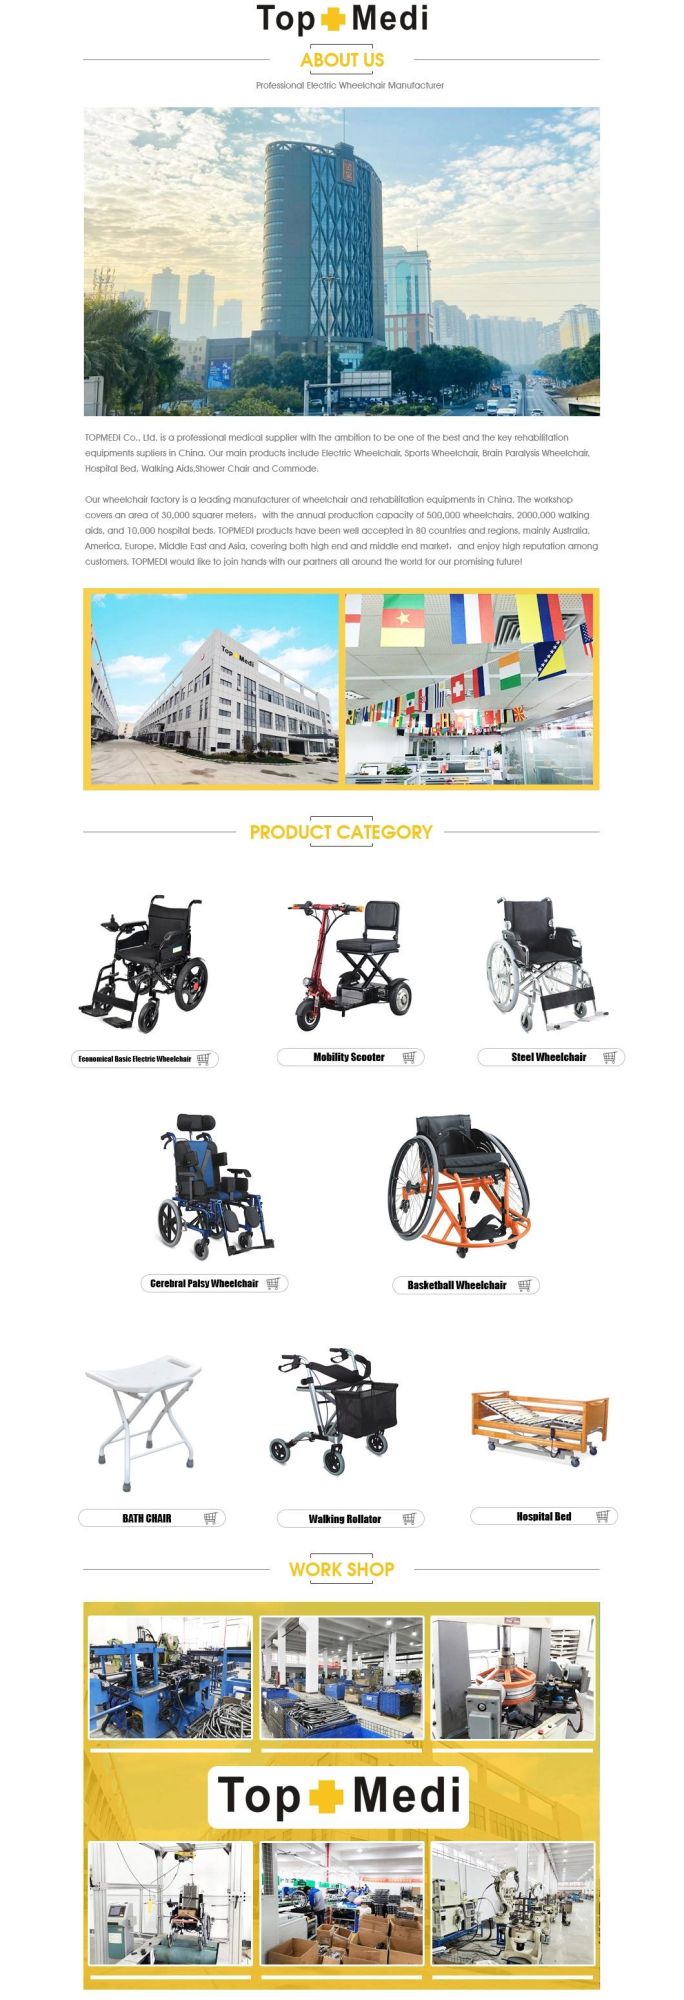 Easy Folding Power Remote Control Electric Wheelchair